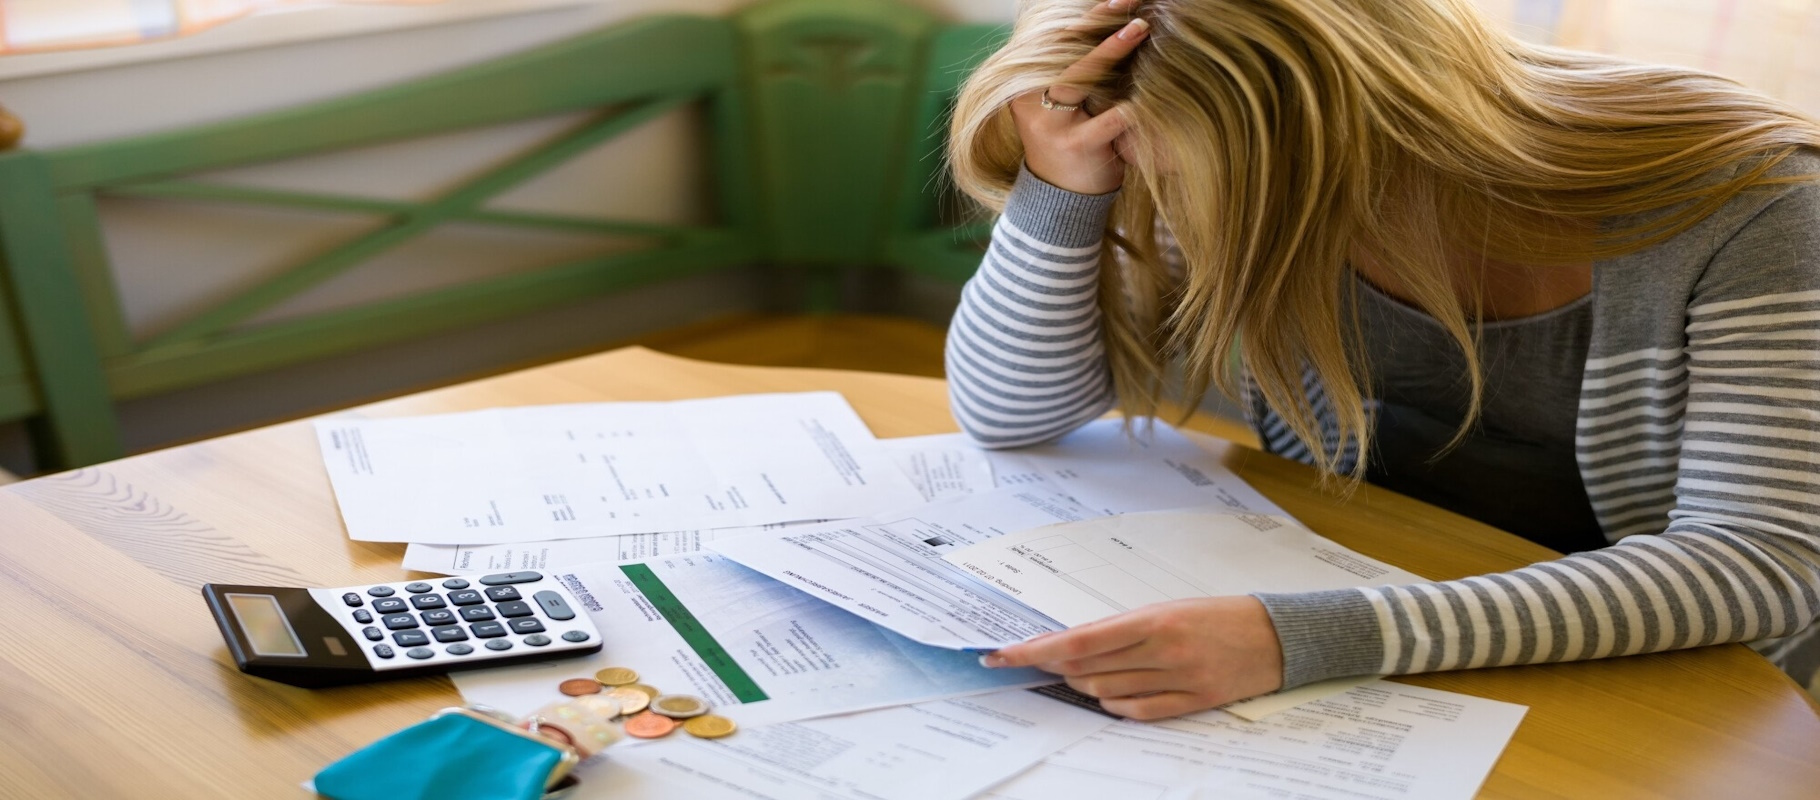 A Woman is sitting at a table with papers spread acroos, calculator and pennies, 9 Signs You Need to File Chapter 7 Bankruptcy, Meredith Law Firm, Chapter 7 Bankruptcy Lawyers, Columbia, SC